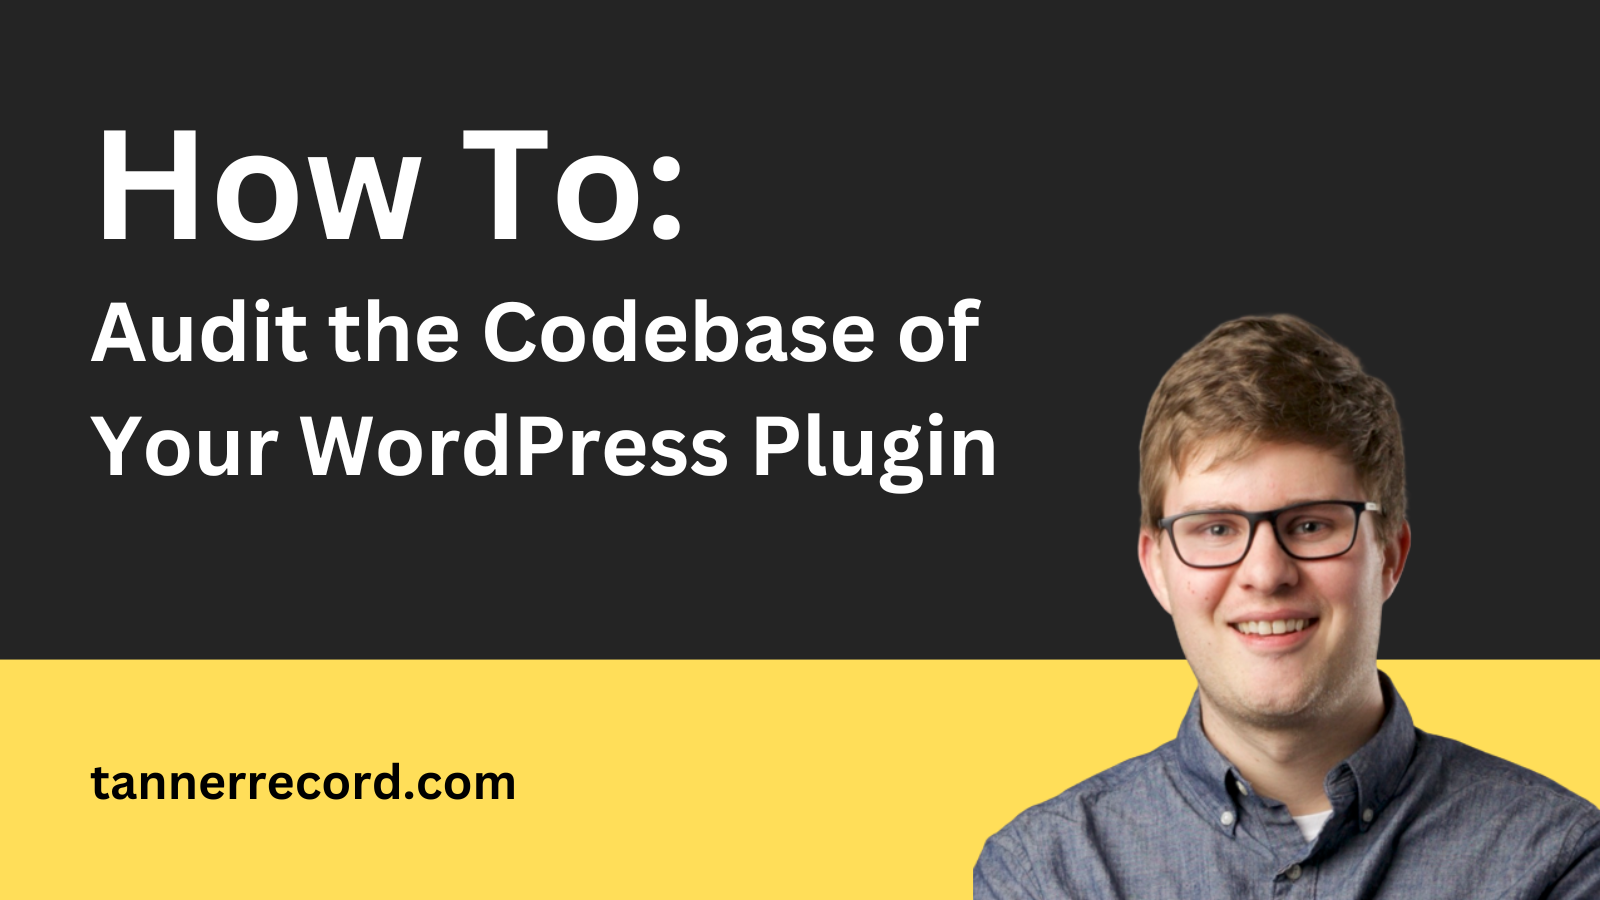 SWPD #009: How to Audit the Codebase of Your WordPress Plugin